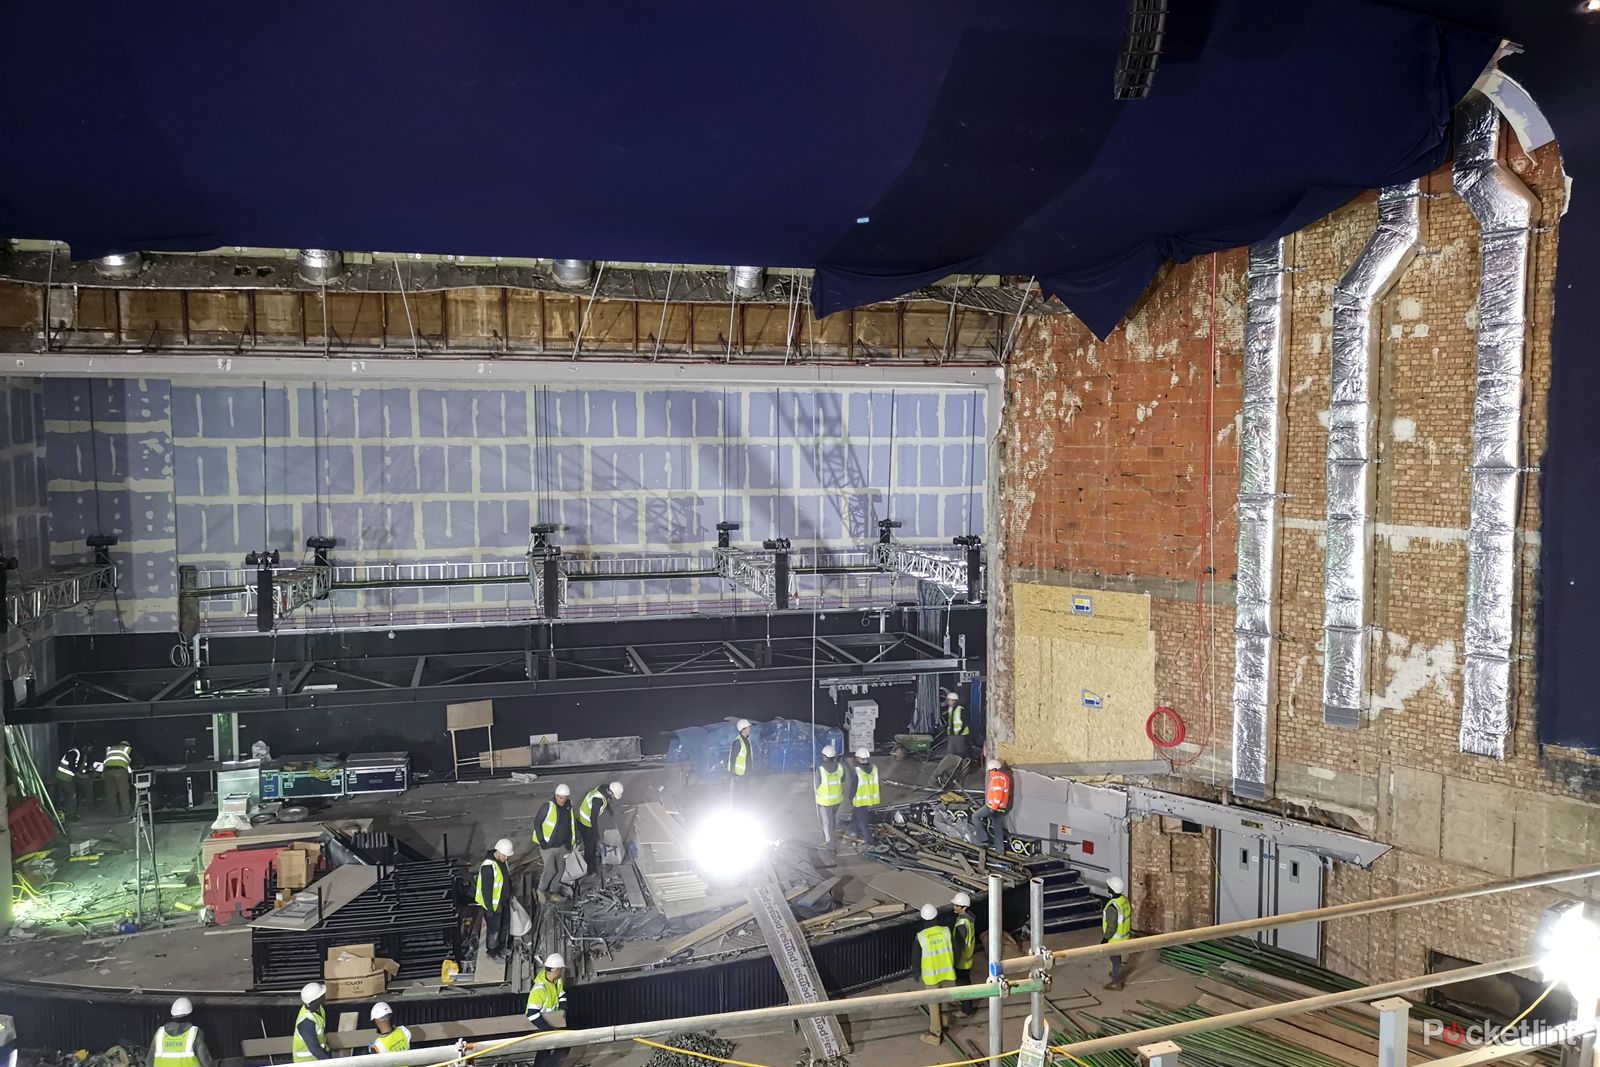 We took a sneak peek inside the UKs first Dolby Cinema at Odeon Leicester Square image 6